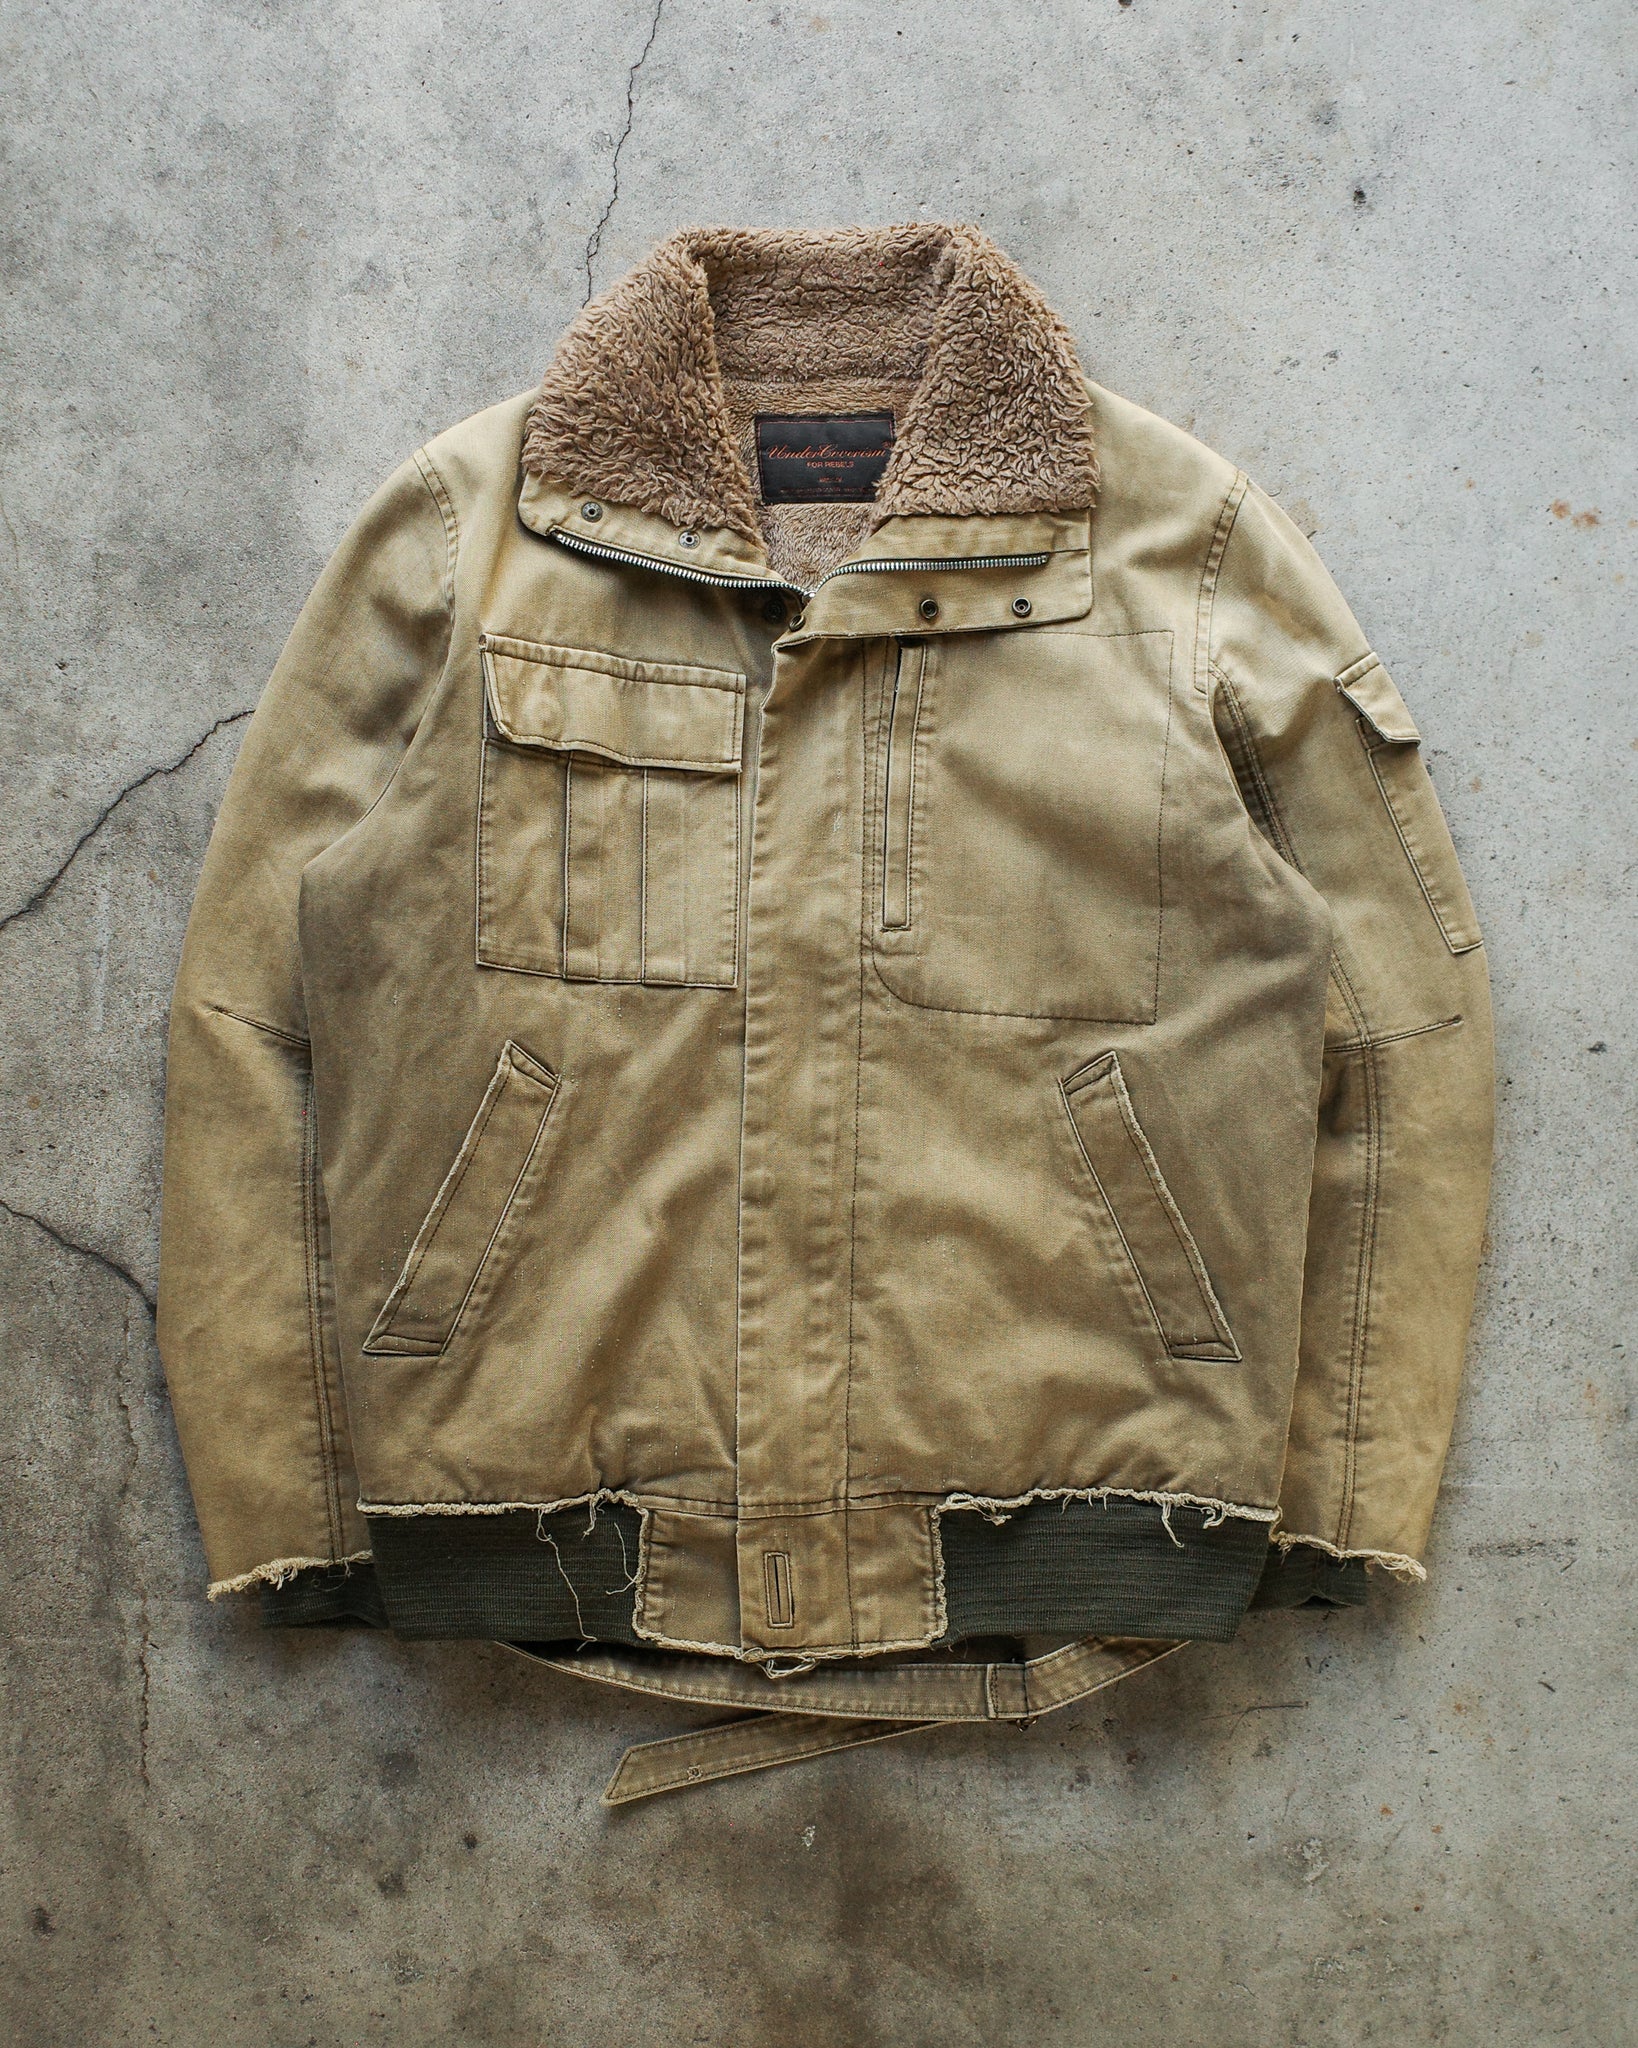 Undercover AW05 Distressed Military Fur Jacket